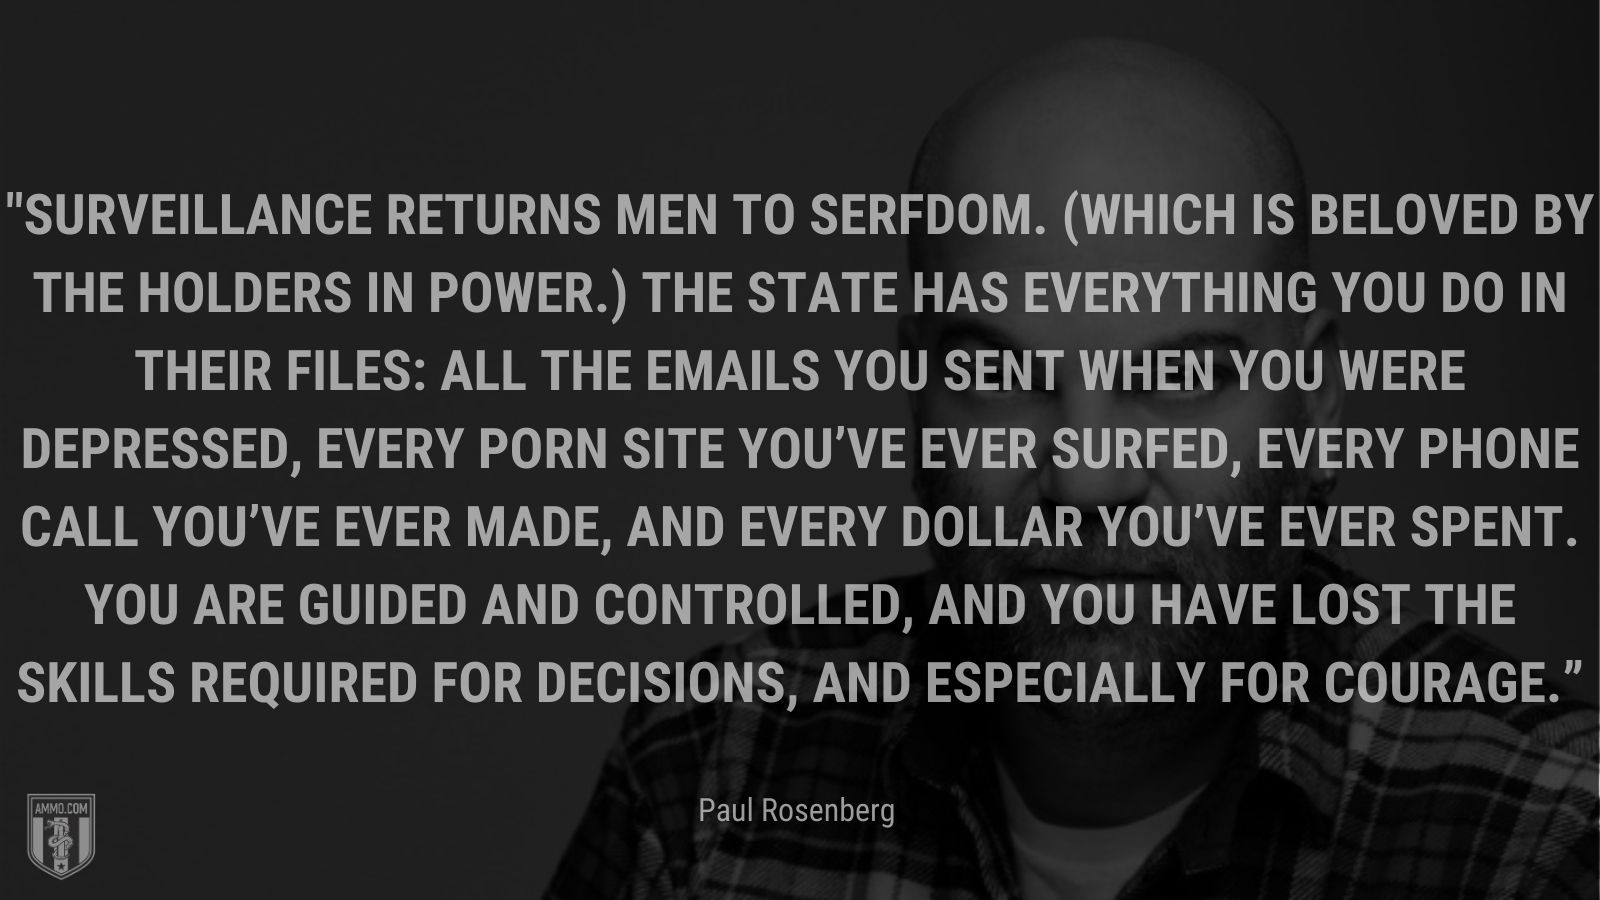 “Surveillance returns men to serfdom. (Which is beloved by the holders in power.) The state has everything you do in their files: All the emails you sent when you were depressed, every porn site you’ve ever surfed, every phone call you’ve ever made, and every dollar you’ve ever spent. You are guided and controlled, and you have lost the skills required for decisions, and especially for courage.” - Paul Rosenberg